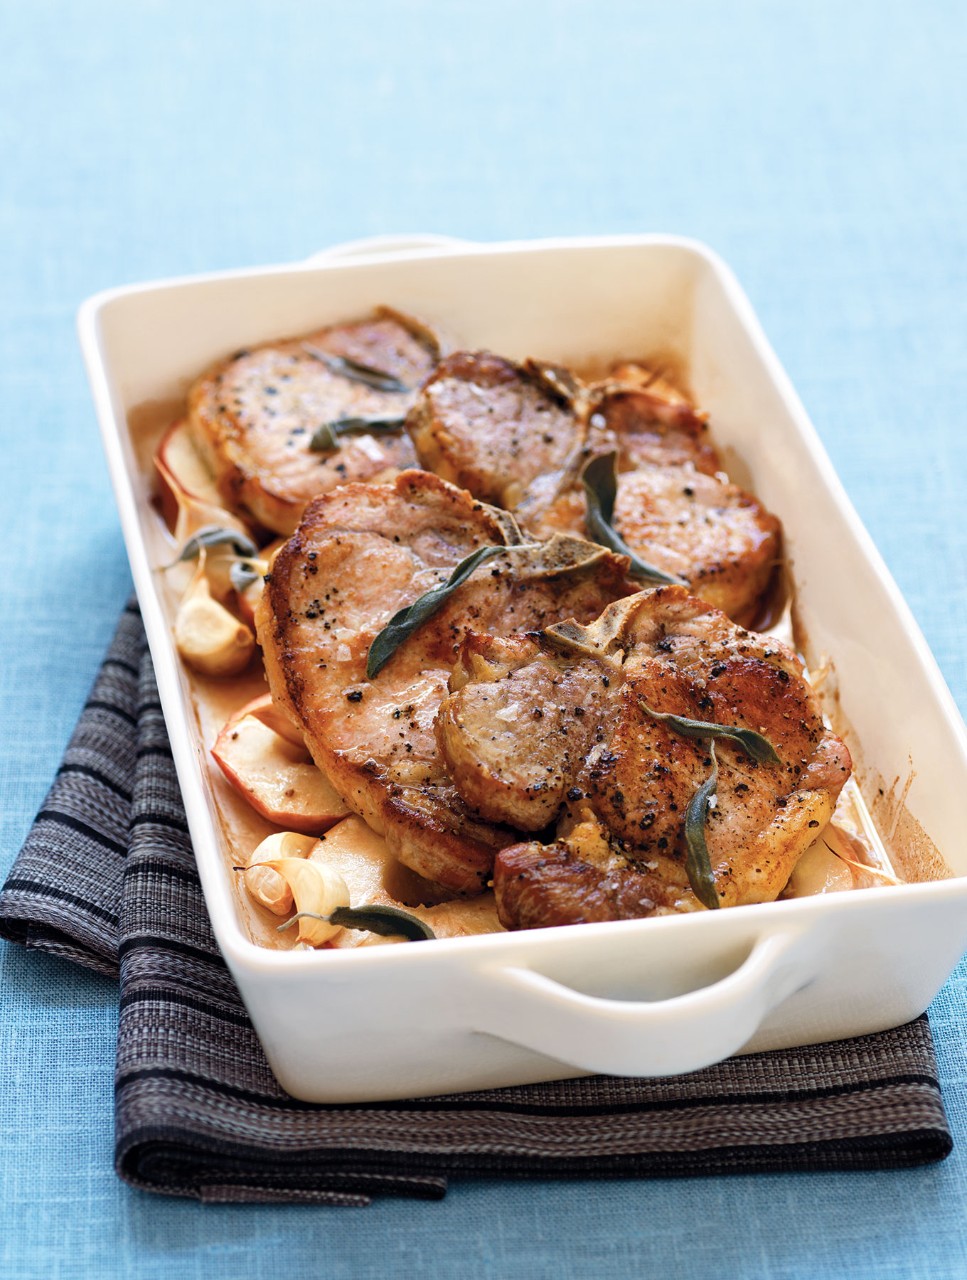 Cider-Braised Ontario Pork Chops with Apples and Garlic